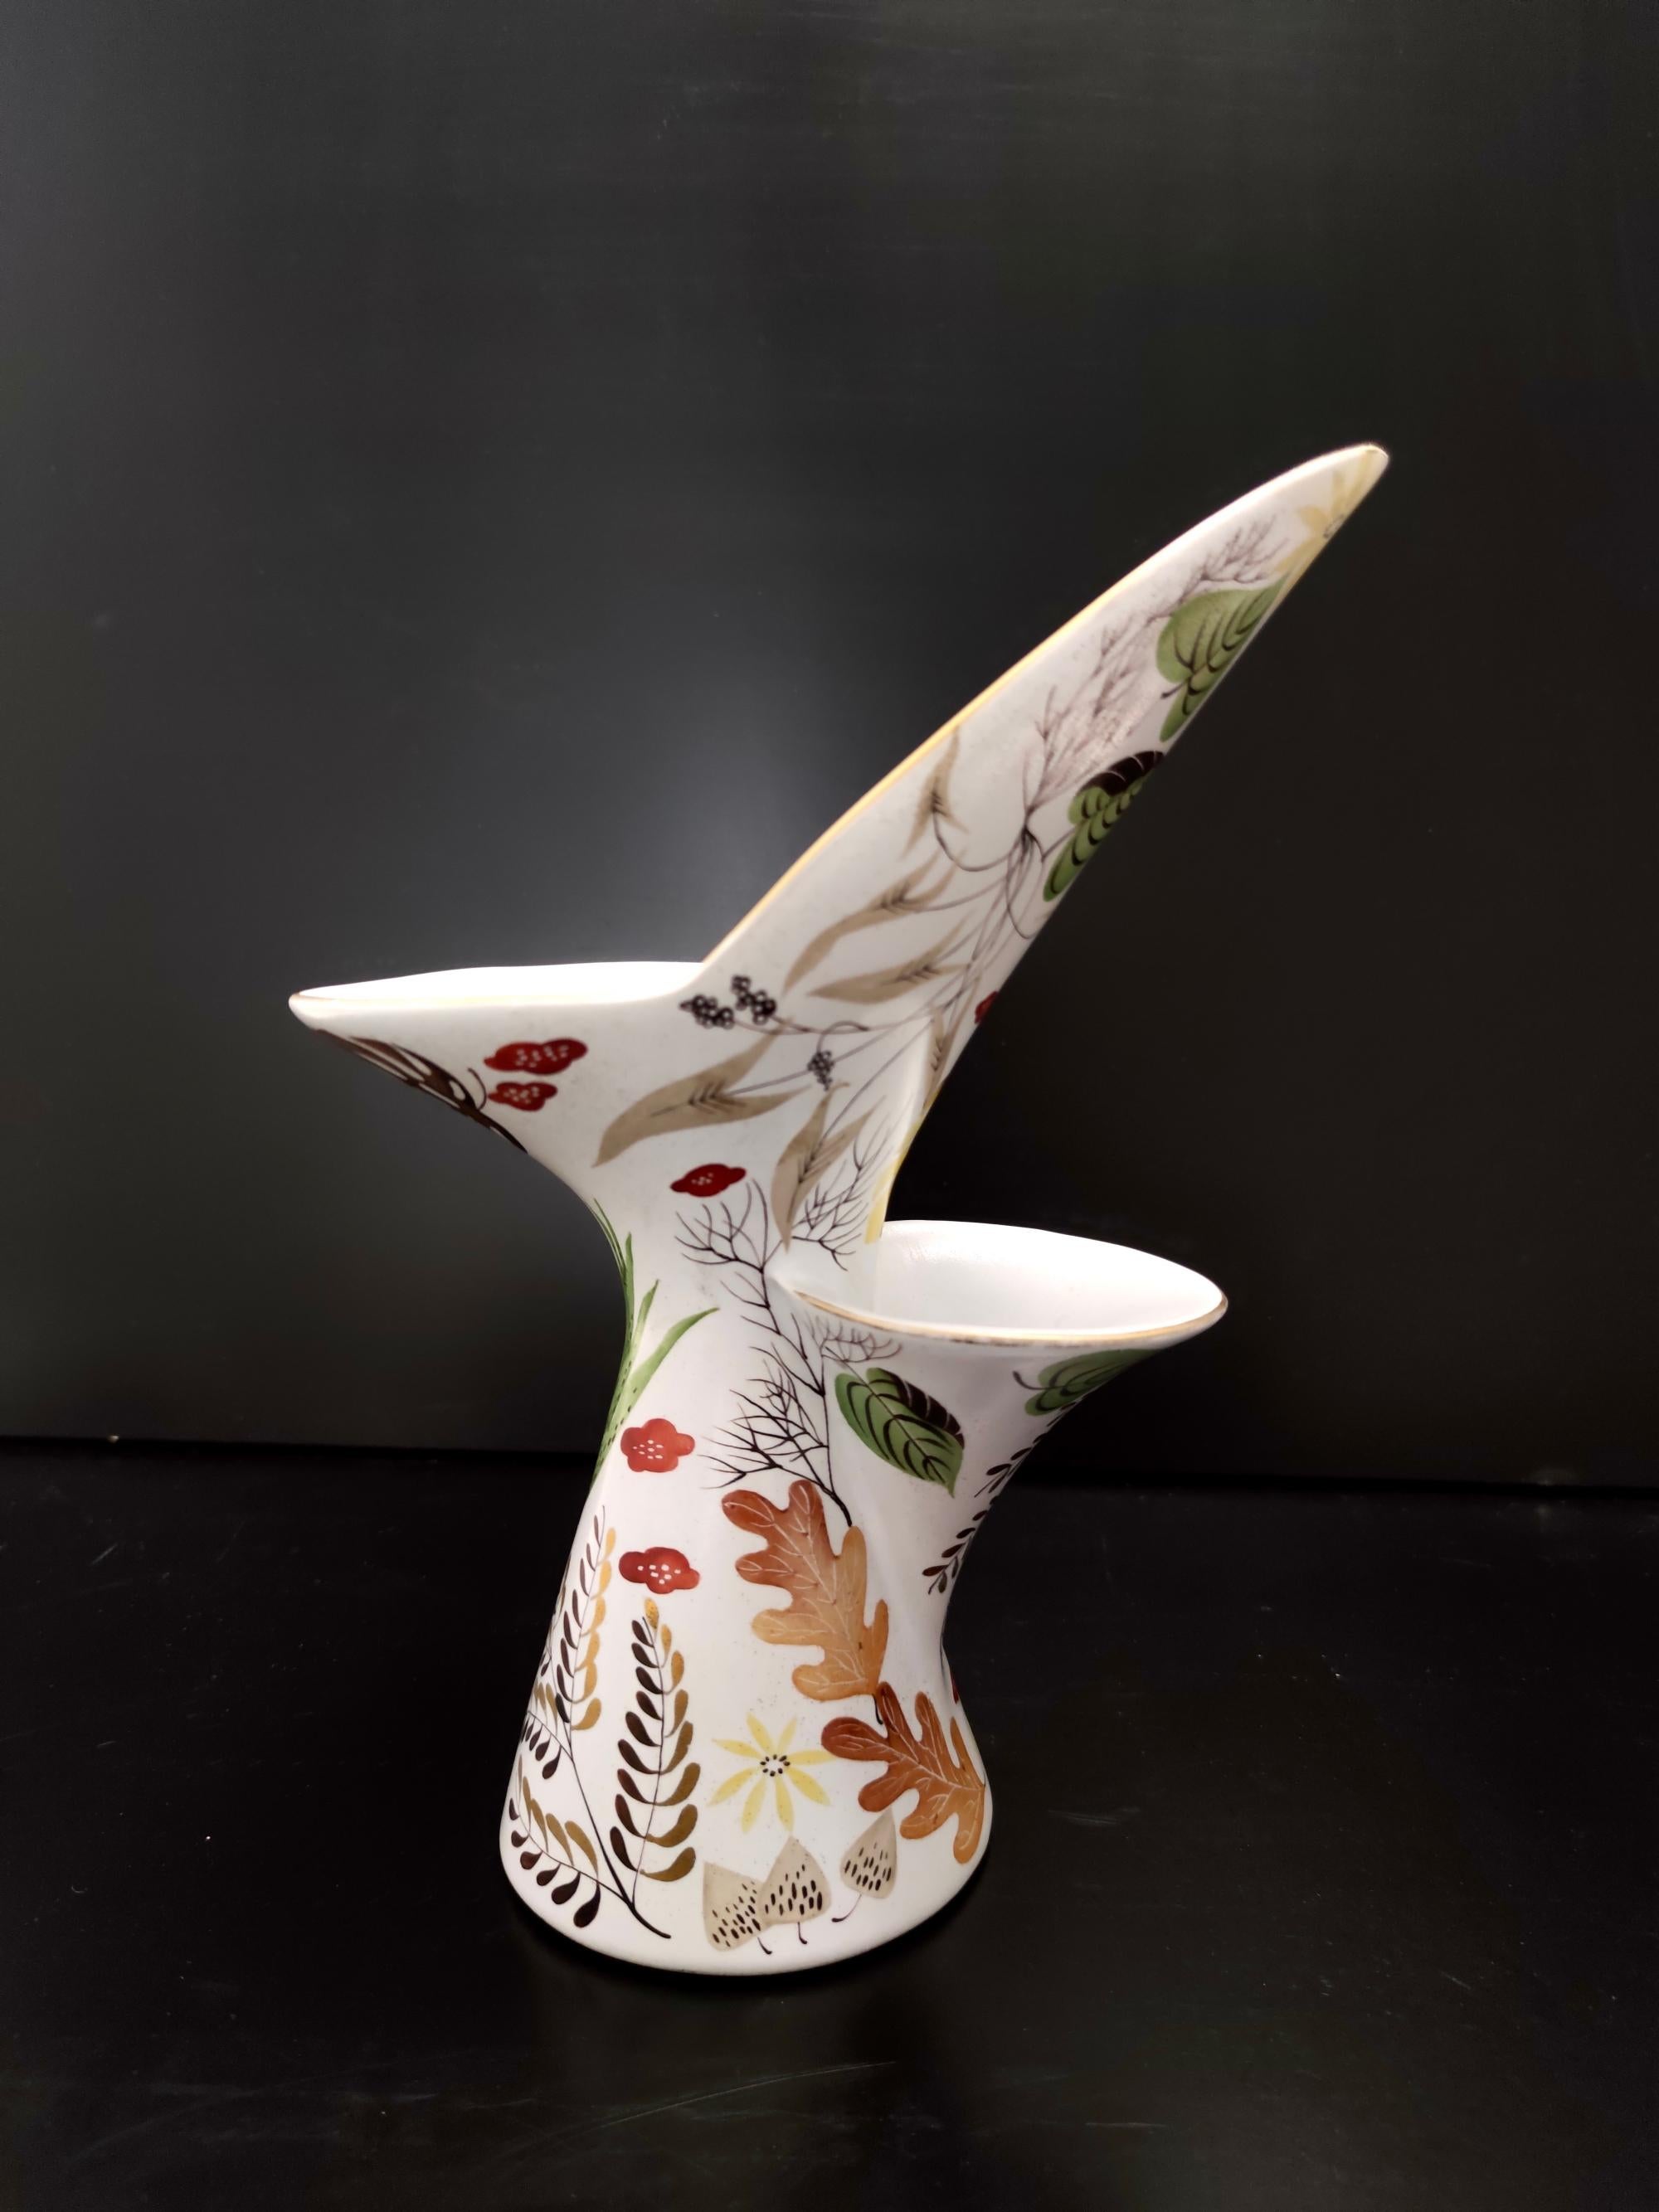 Rare Hand-painted Ceramic Vase by Antonia Campi for Lavenia, Italy In Excellent Condition For Sale In Bresso, Lombardy